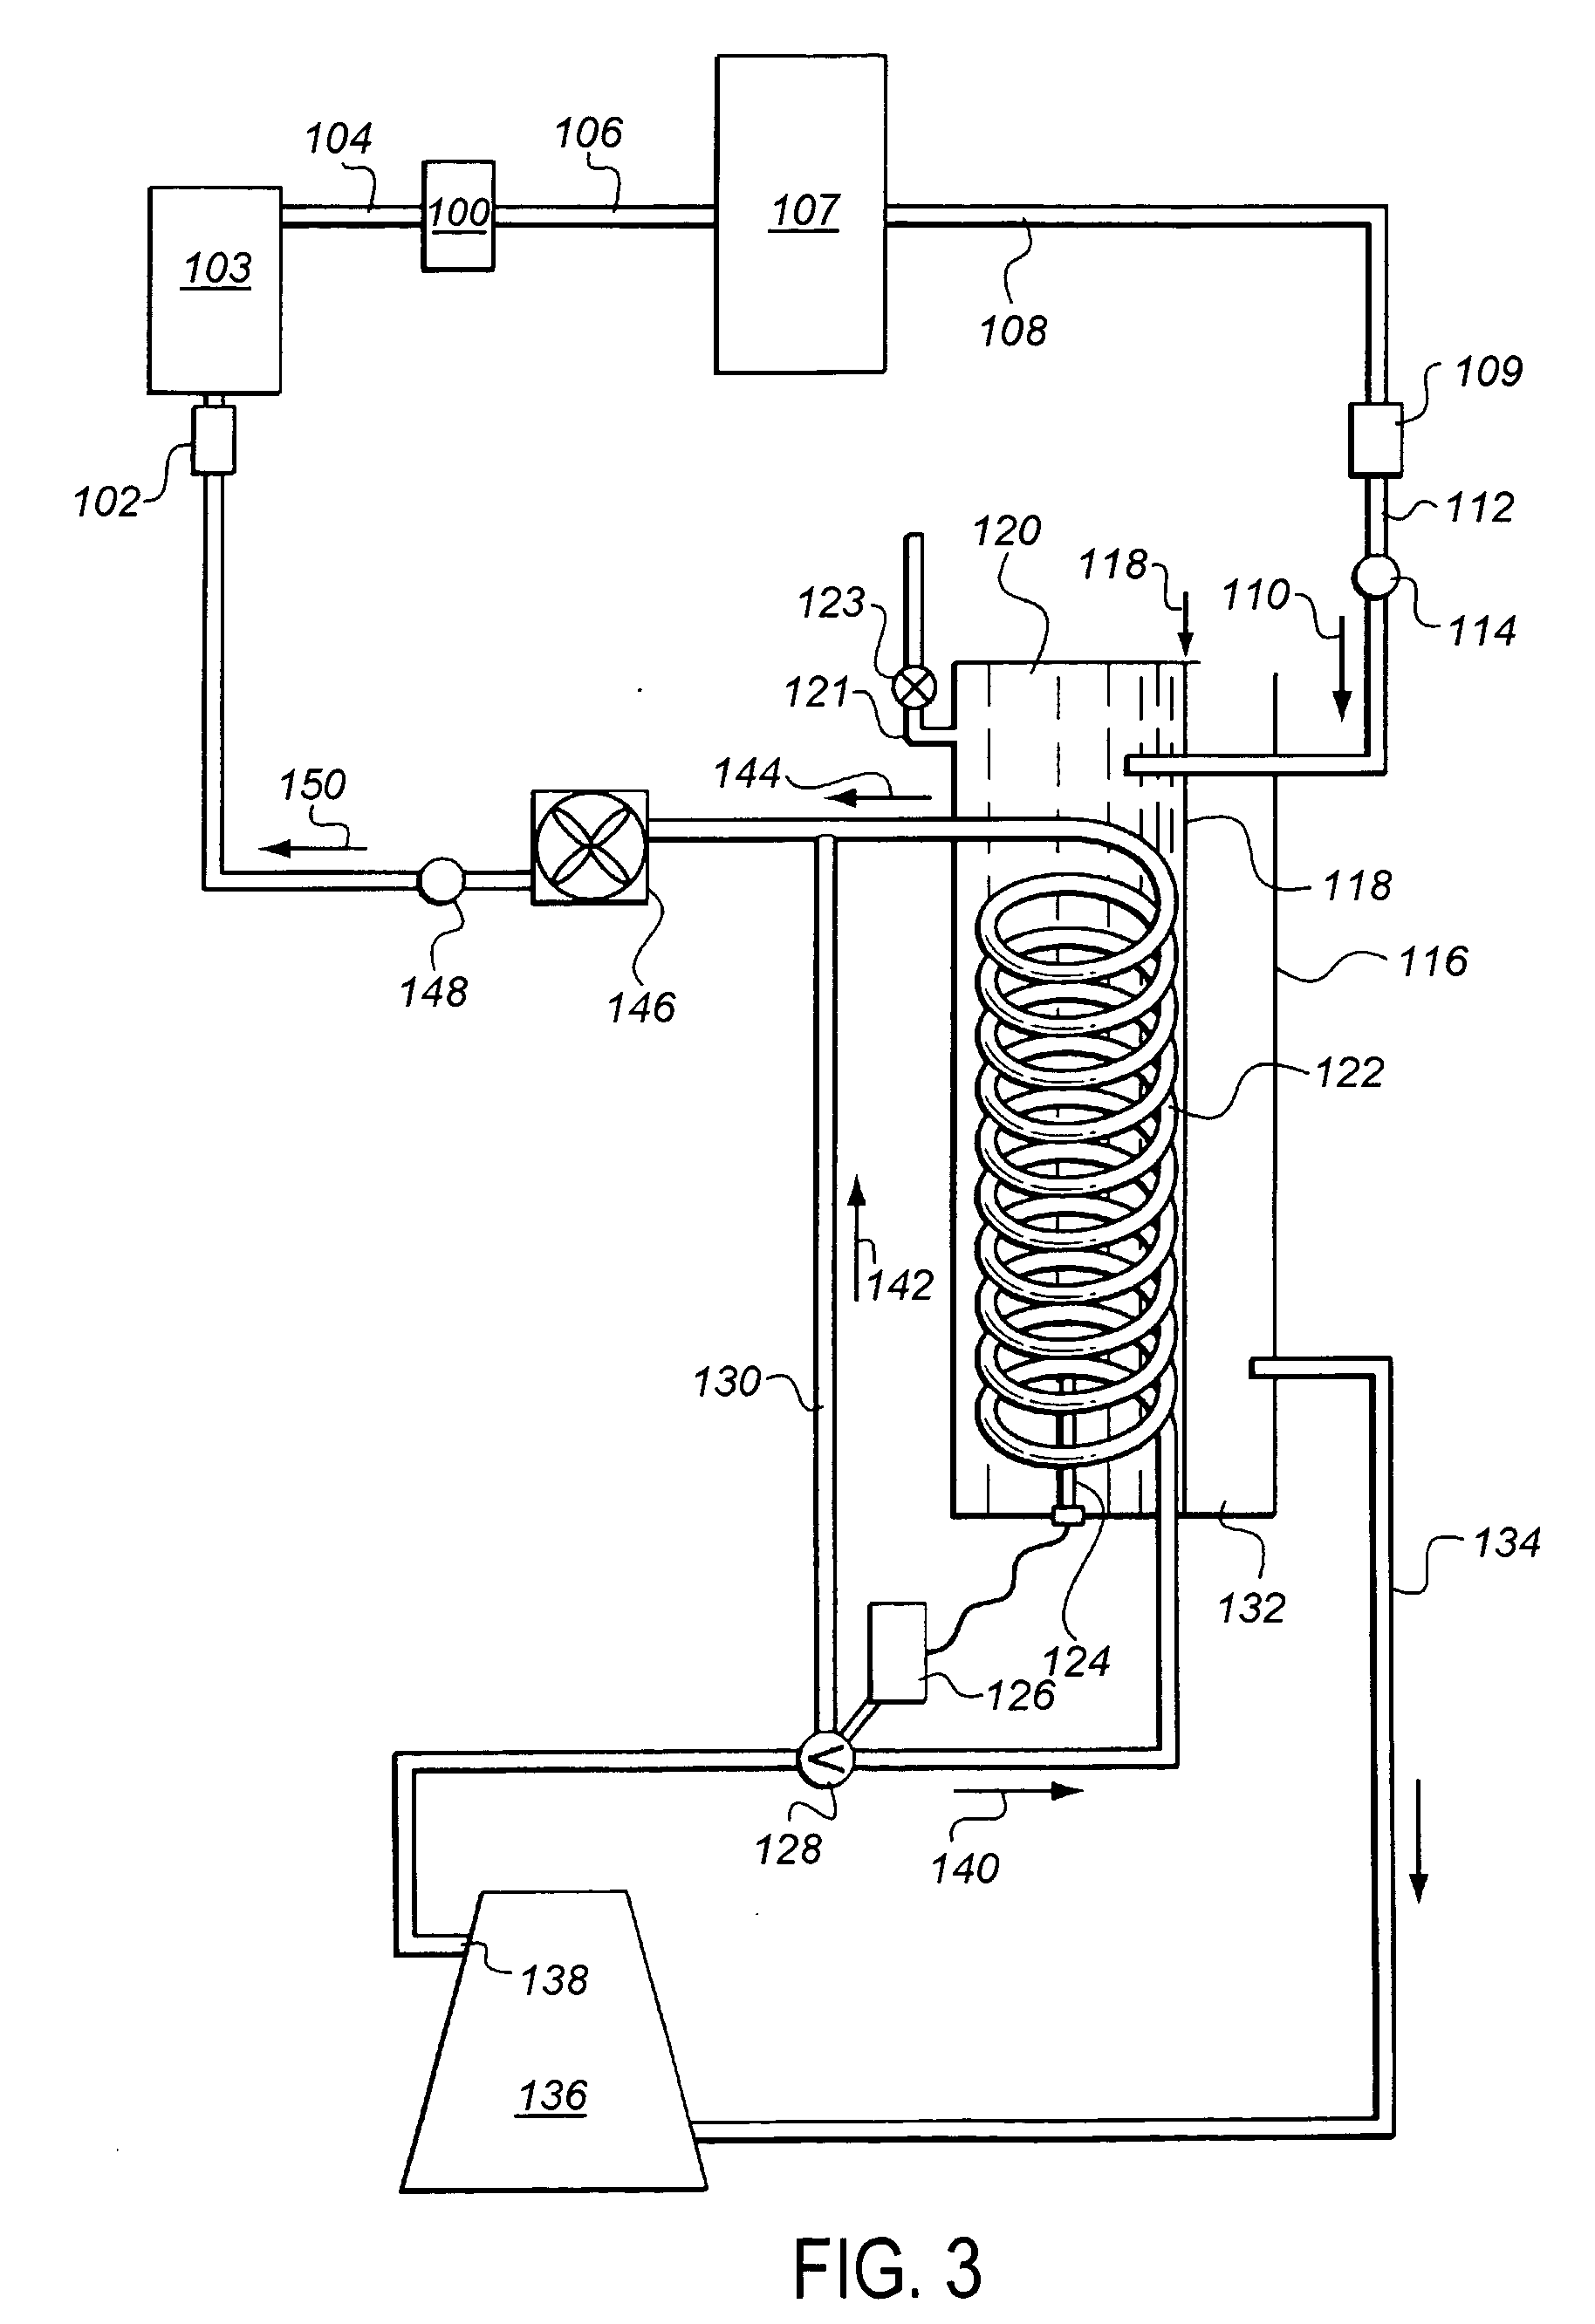 Method and apparatus for optimizing refrigeration systems